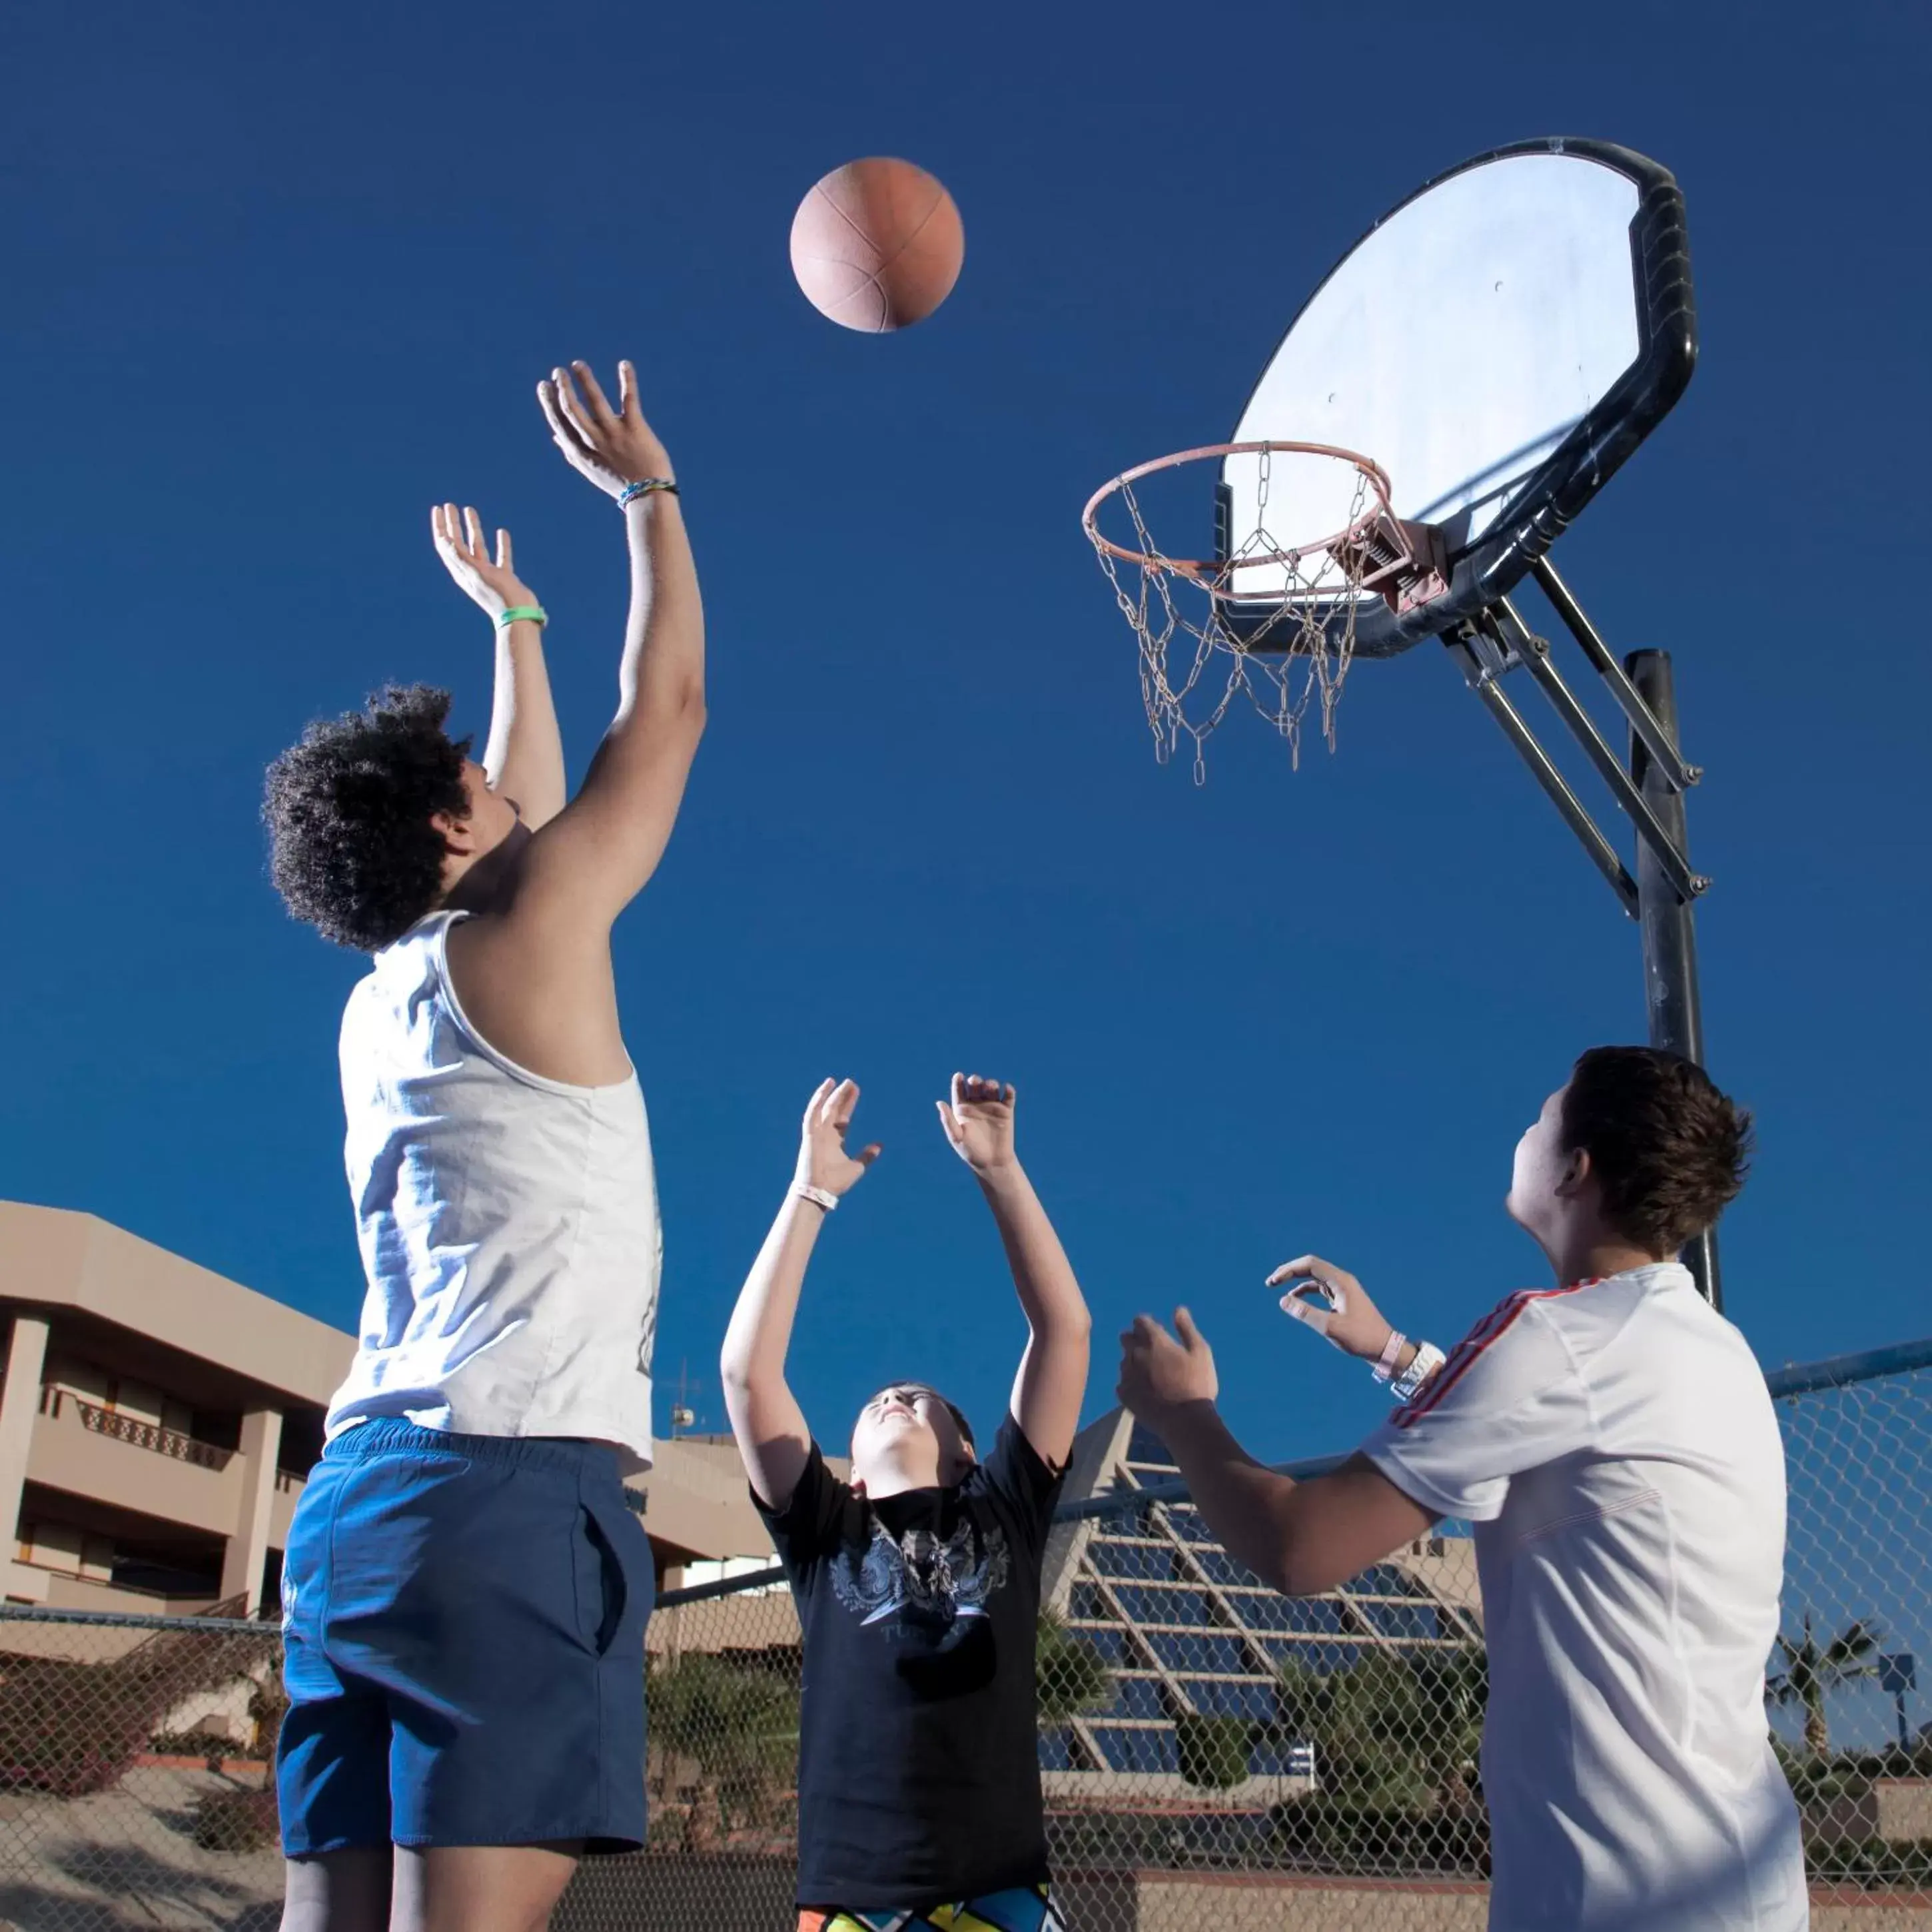 Sports, Other Activities in Pharaoh Azur Resort